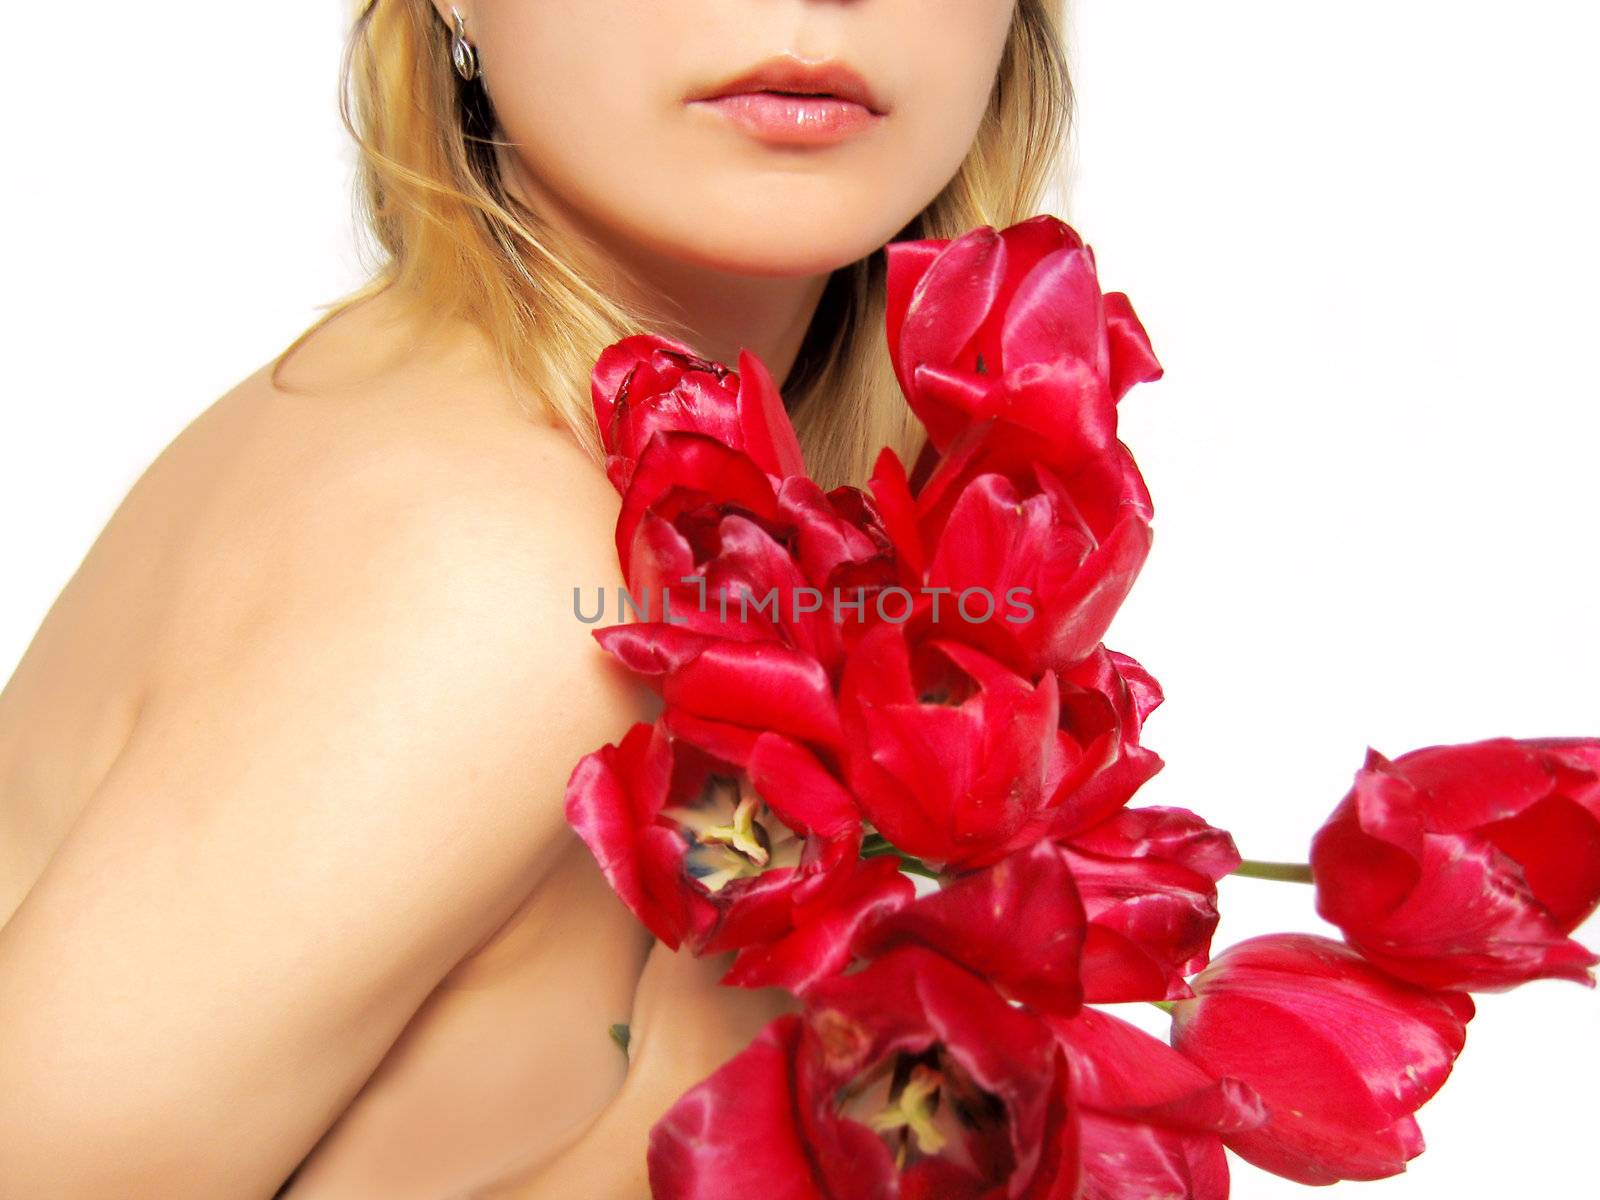 sensual part of woman's body holding tulips on white